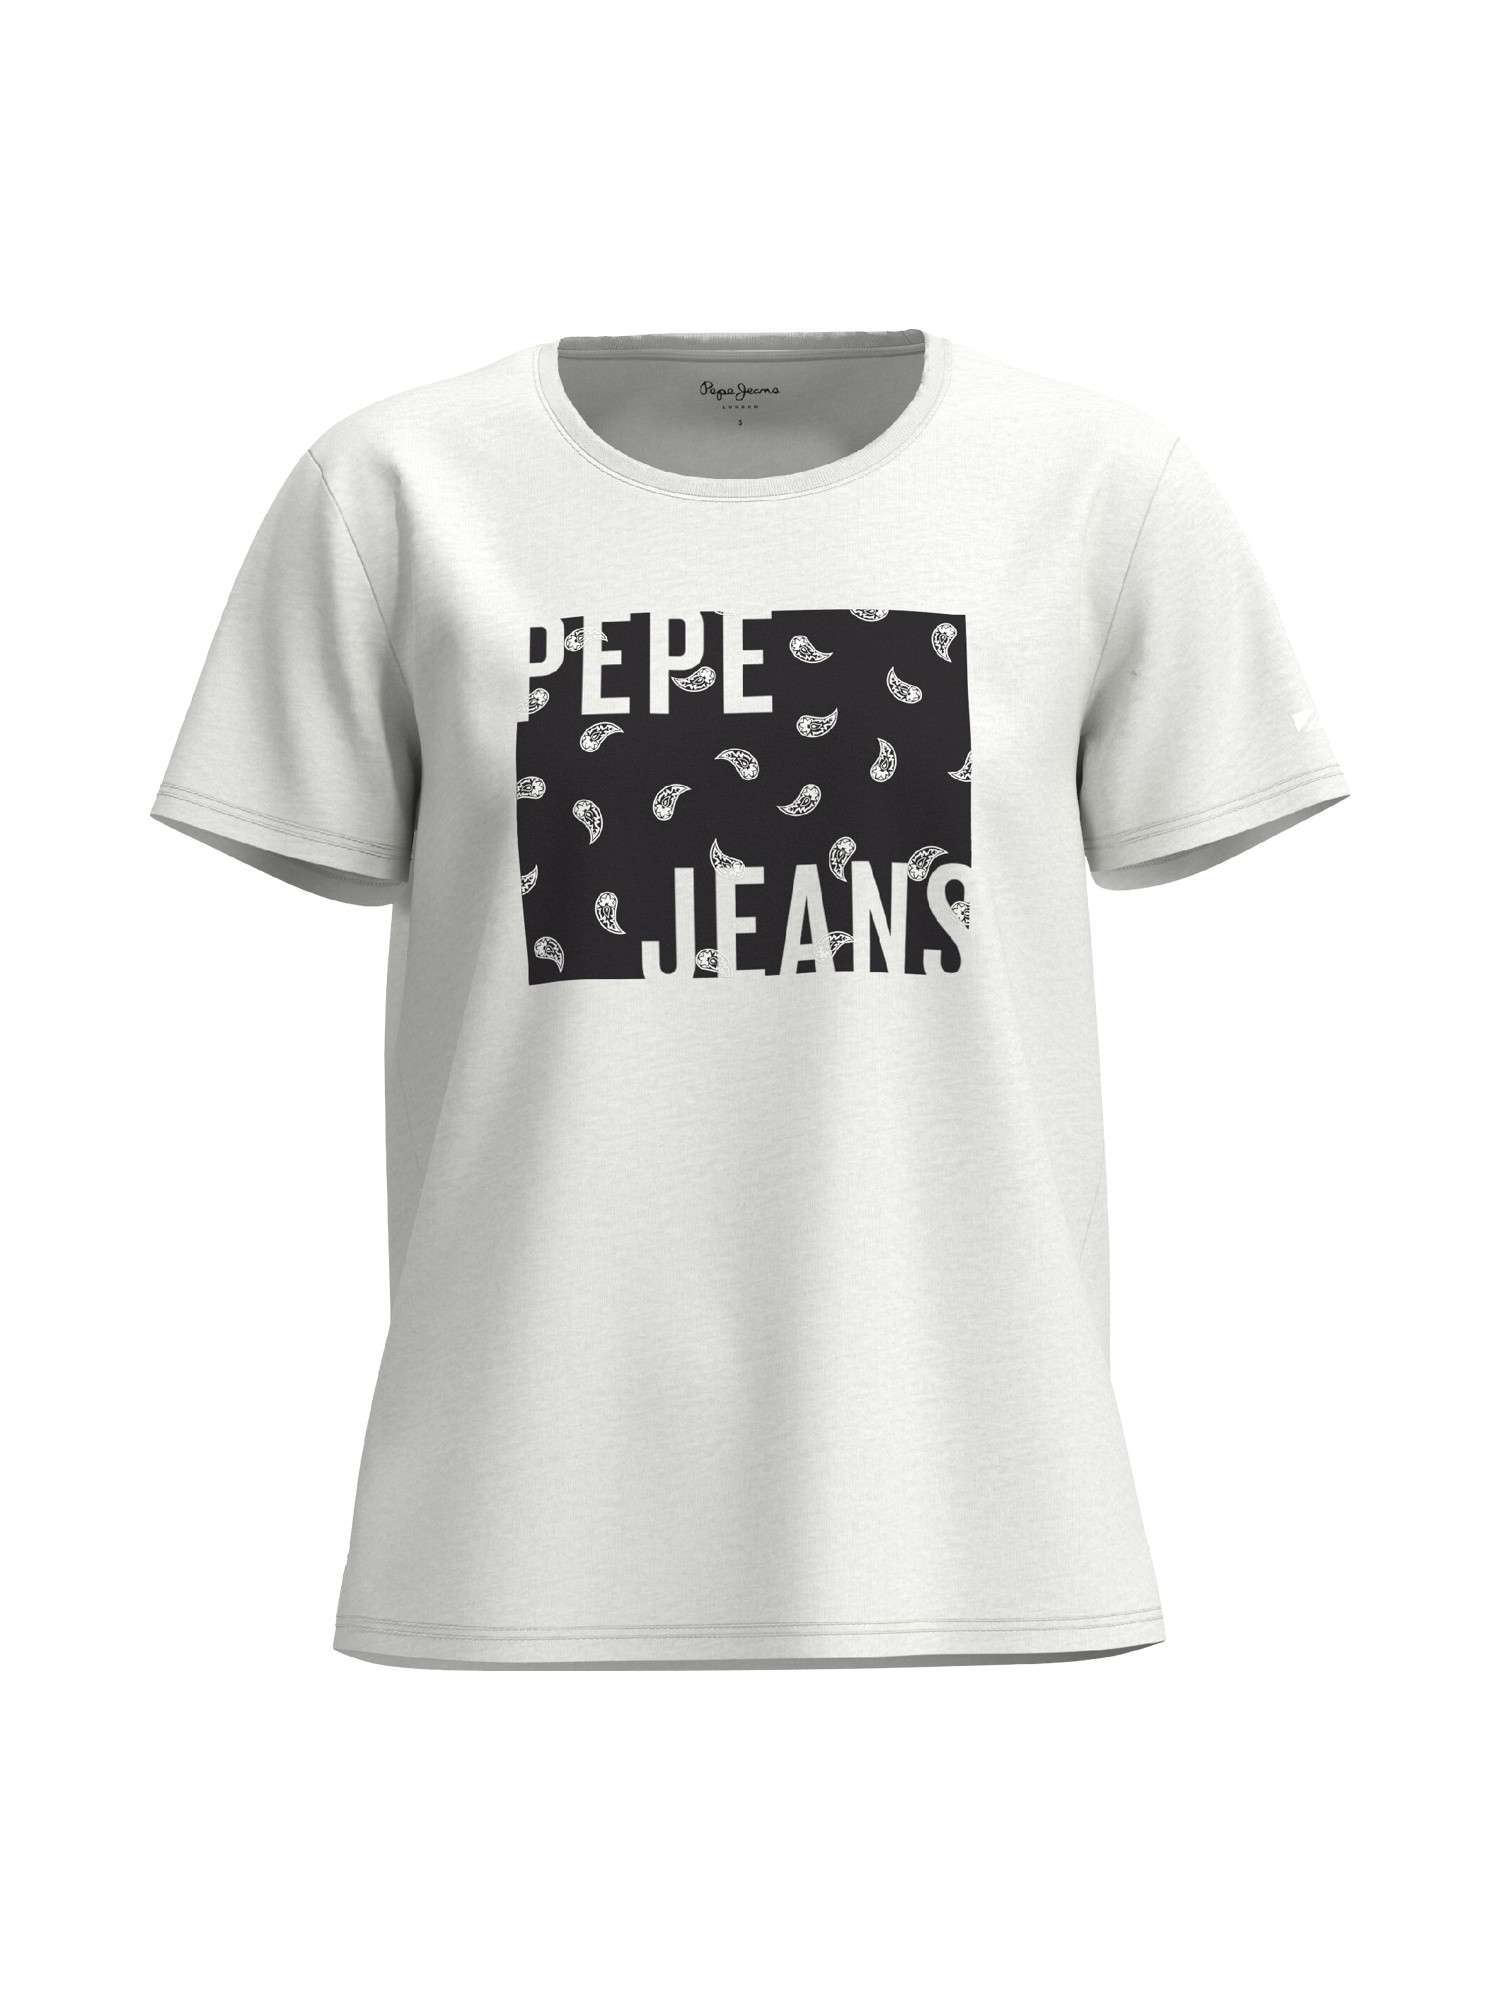 Pepe jeans - T-shirt con stampa, Bianco, large image number 0